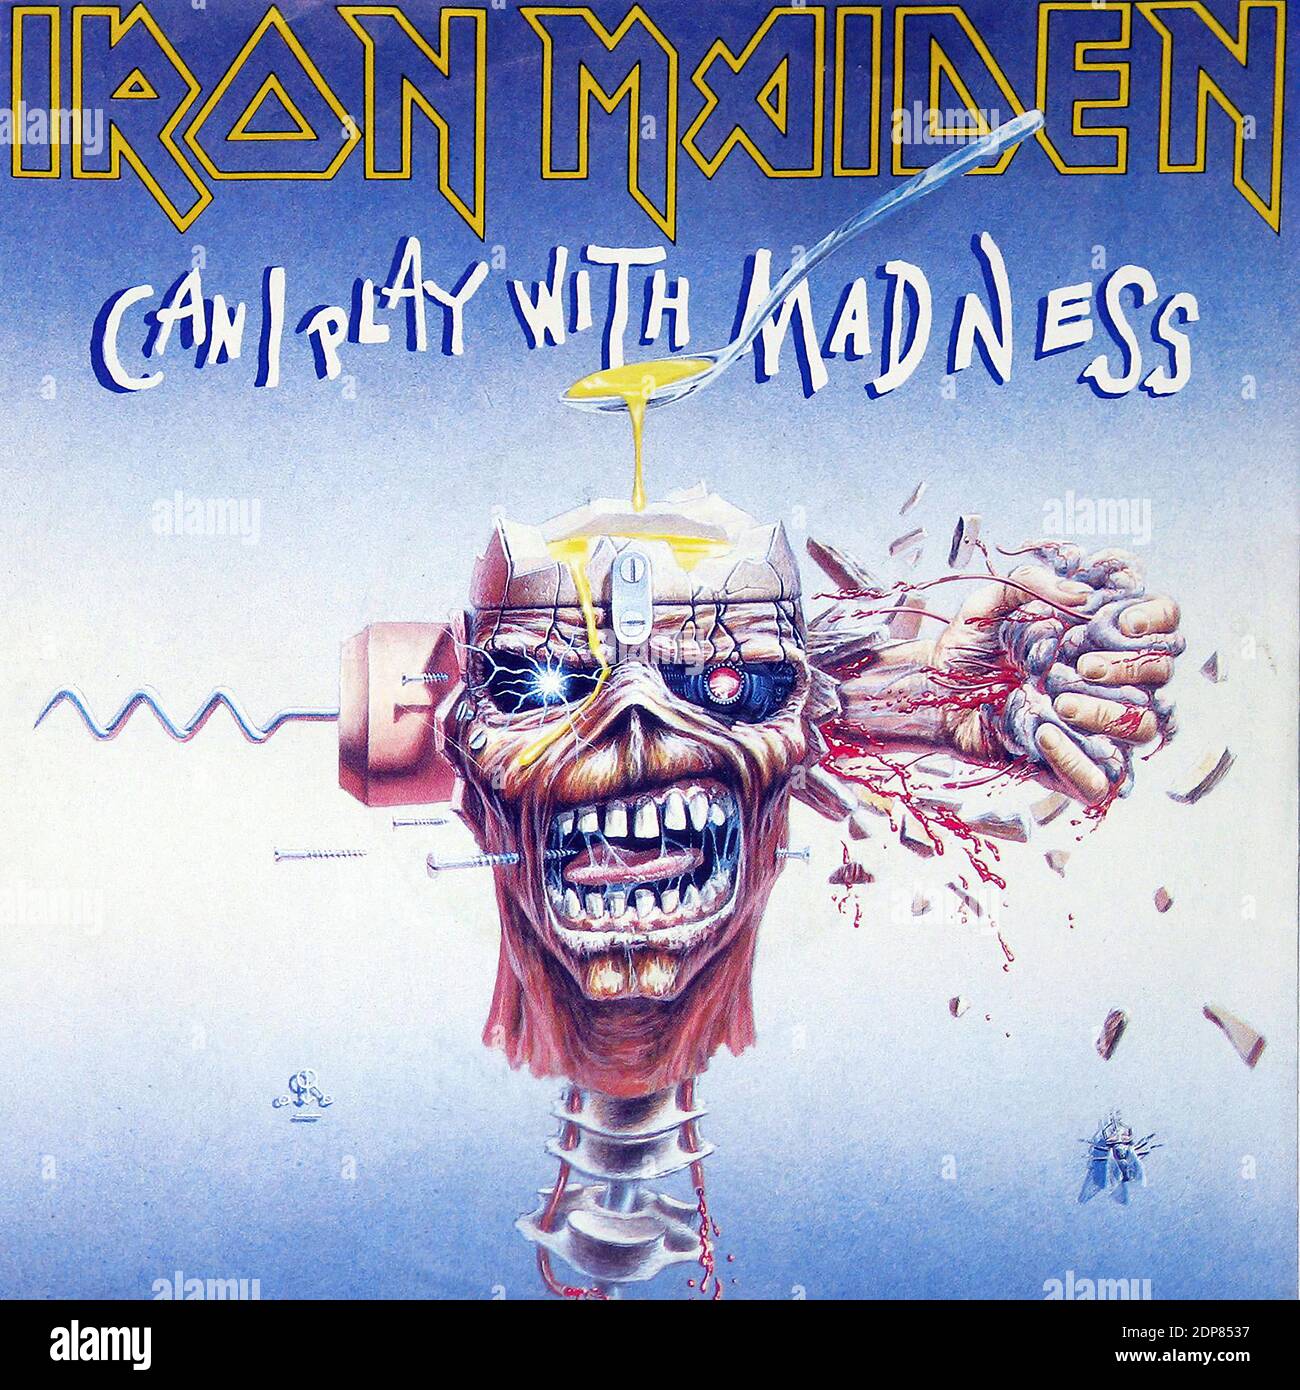 IRON MAIDEN CAN I Play with Madness   Black Bart Blues - Vintage Vinyl Record Banque D'Images